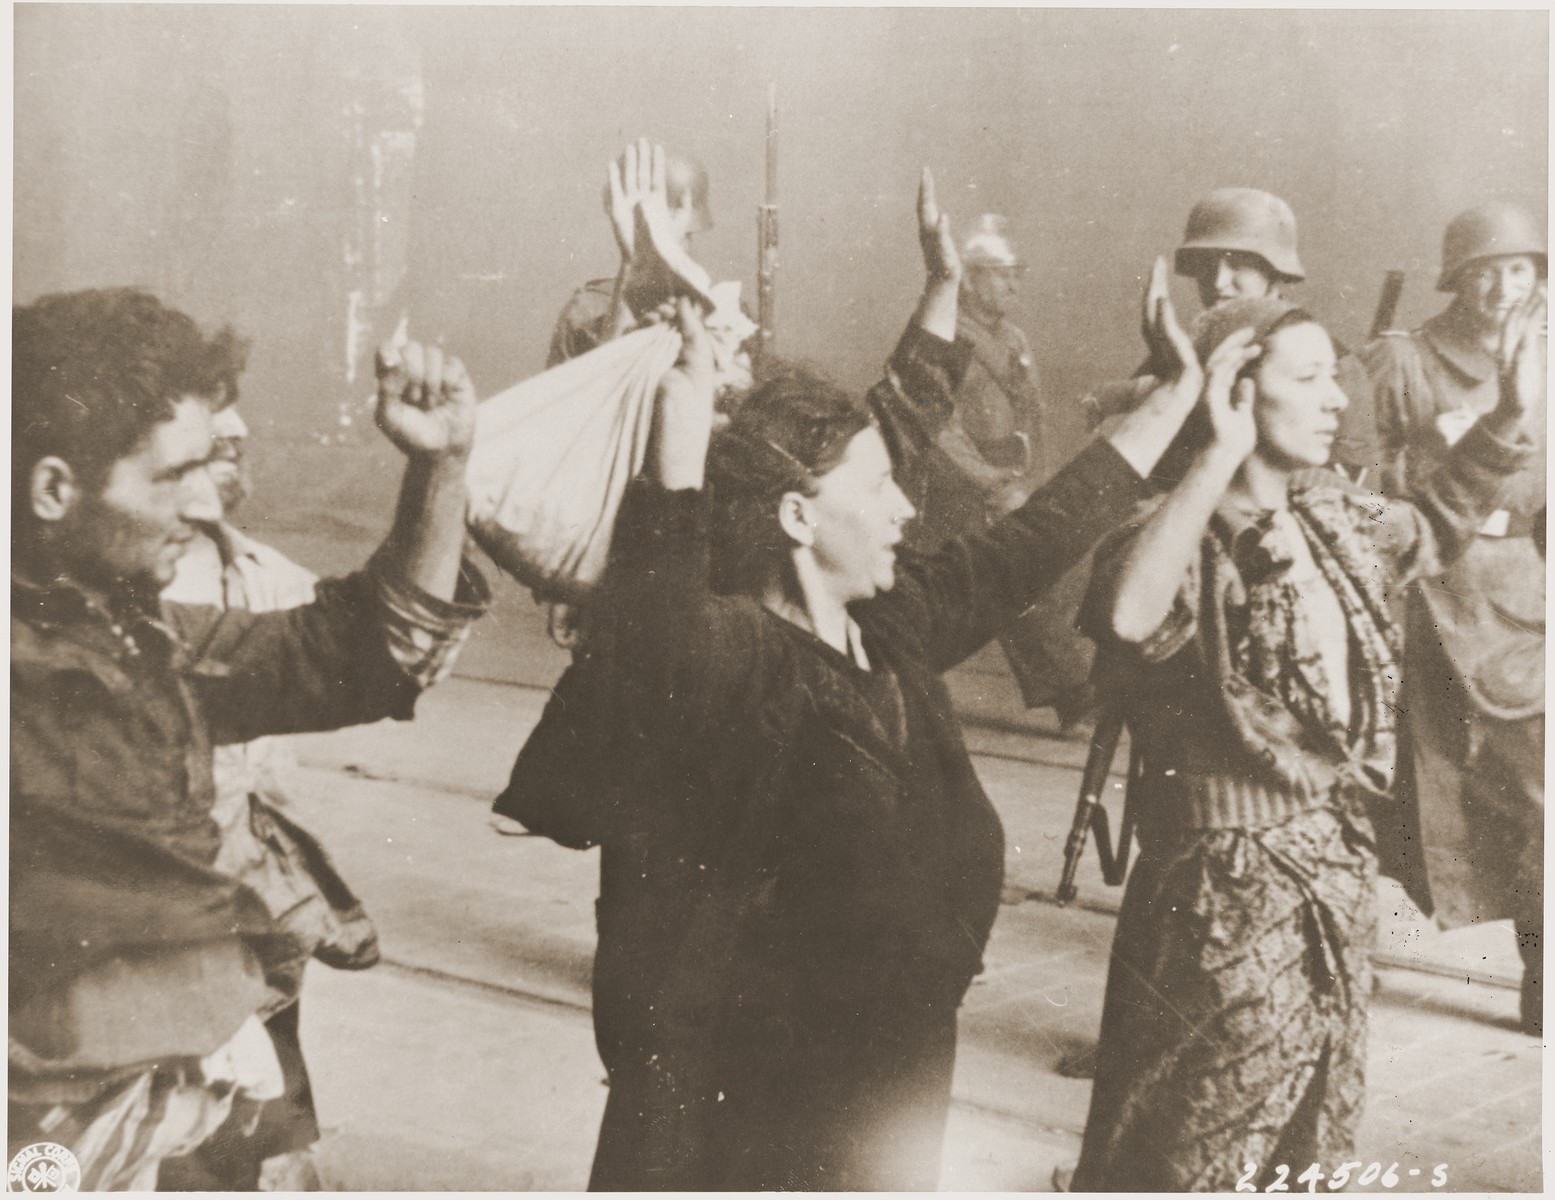 Members of the Jewish resistance are captured by SS troops on Nowolipie Street during the suppression of the Warsaw ghetto uprising.  The original German caption reads: "These bandits offered armed resistance."

Original caption from donated photograph reads:  "The following pictures are copies of the book containing the report of the German commander who was responsible for cleaning out that ghetto in Warsaw, Poland.  This report, in the form of a leather bound book, was presented as evidence by the U.S. prosecution, Maj. Frank Walsh, at the international tribunal trials at Nurnberg, Germany."